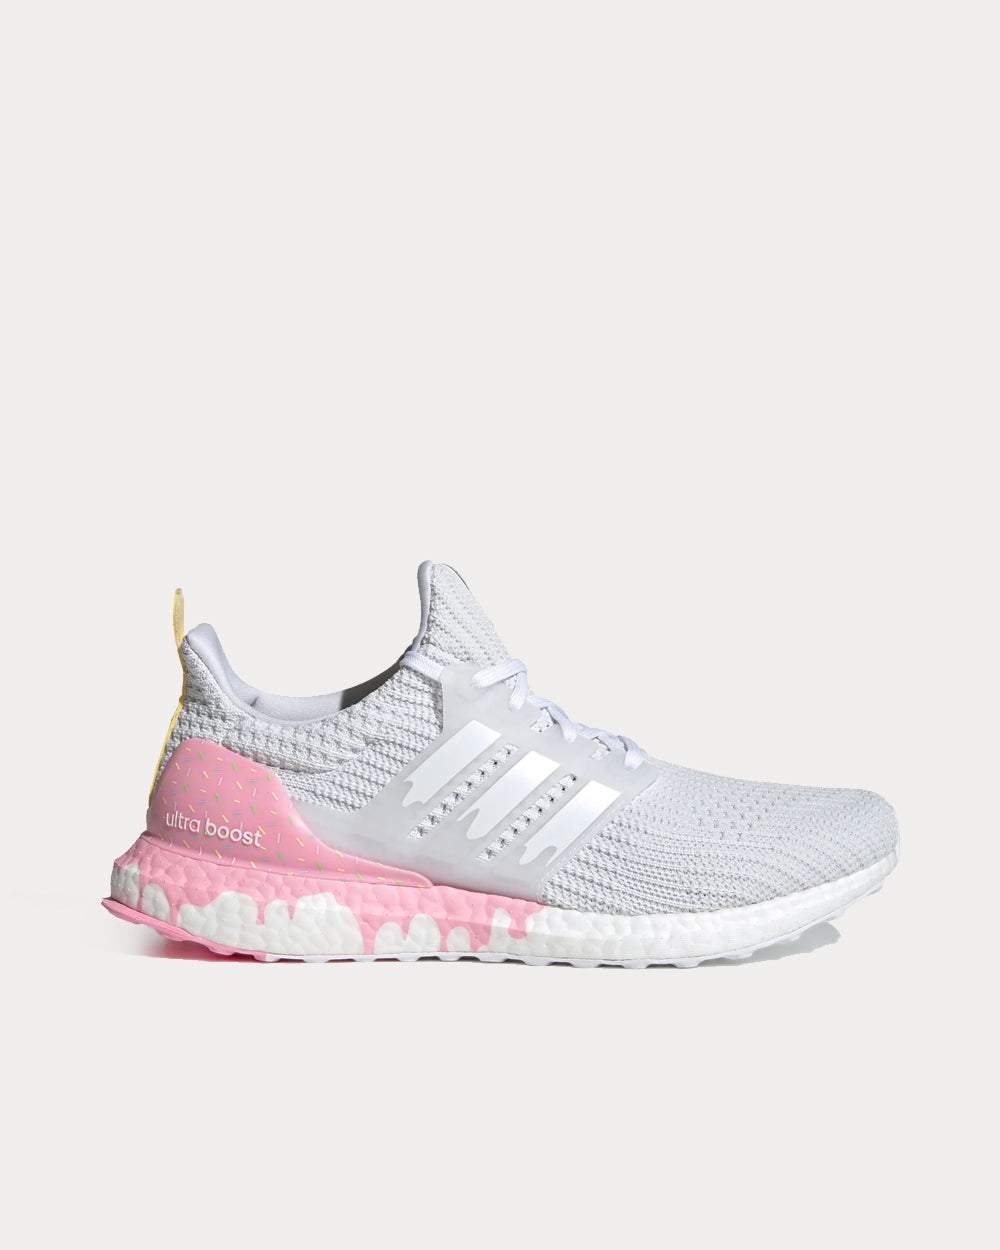 Ultraboost DNA Cloud White / Cloud White / Light Pink Running Shoes